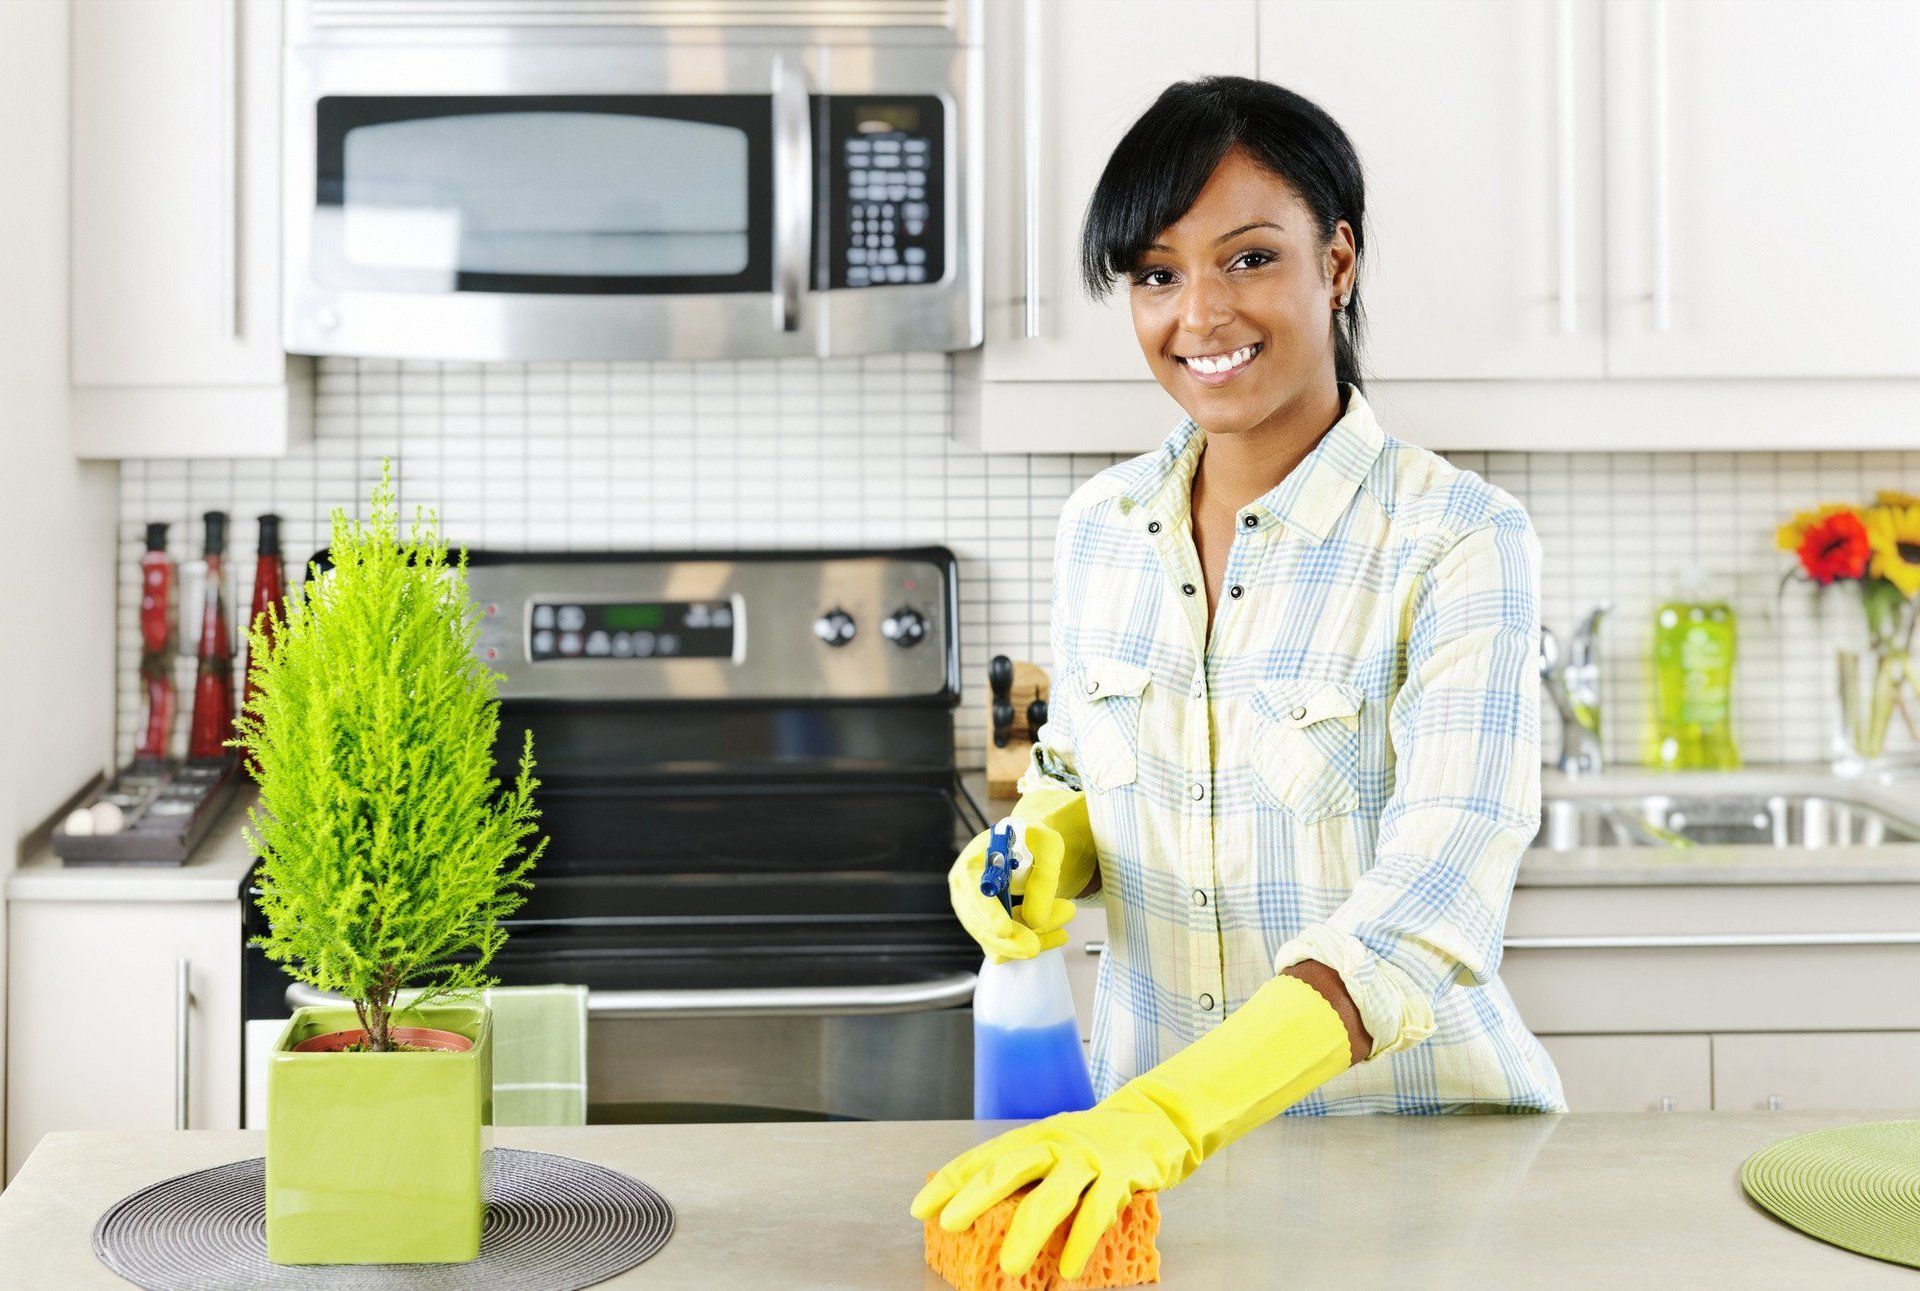 5 Kitchen Cleaning Hacks That Will Save You Time and Money